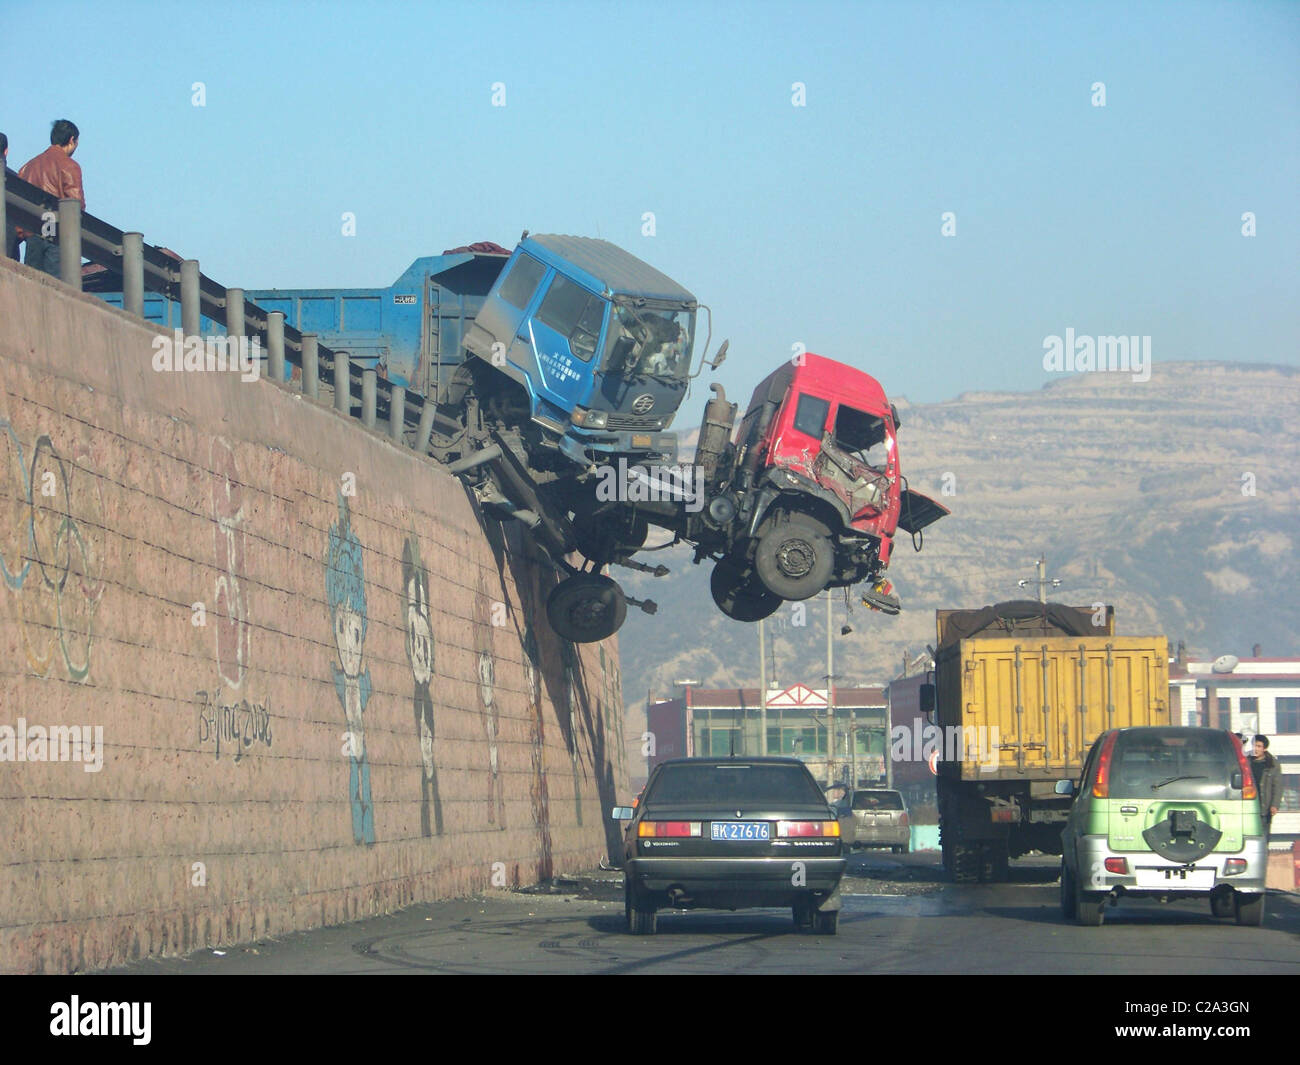 A truck hangs perilously over an overpass after colliding with another vehicle on the Duanchun Bridge in Jinzhong Shanxi. The Stock Photo